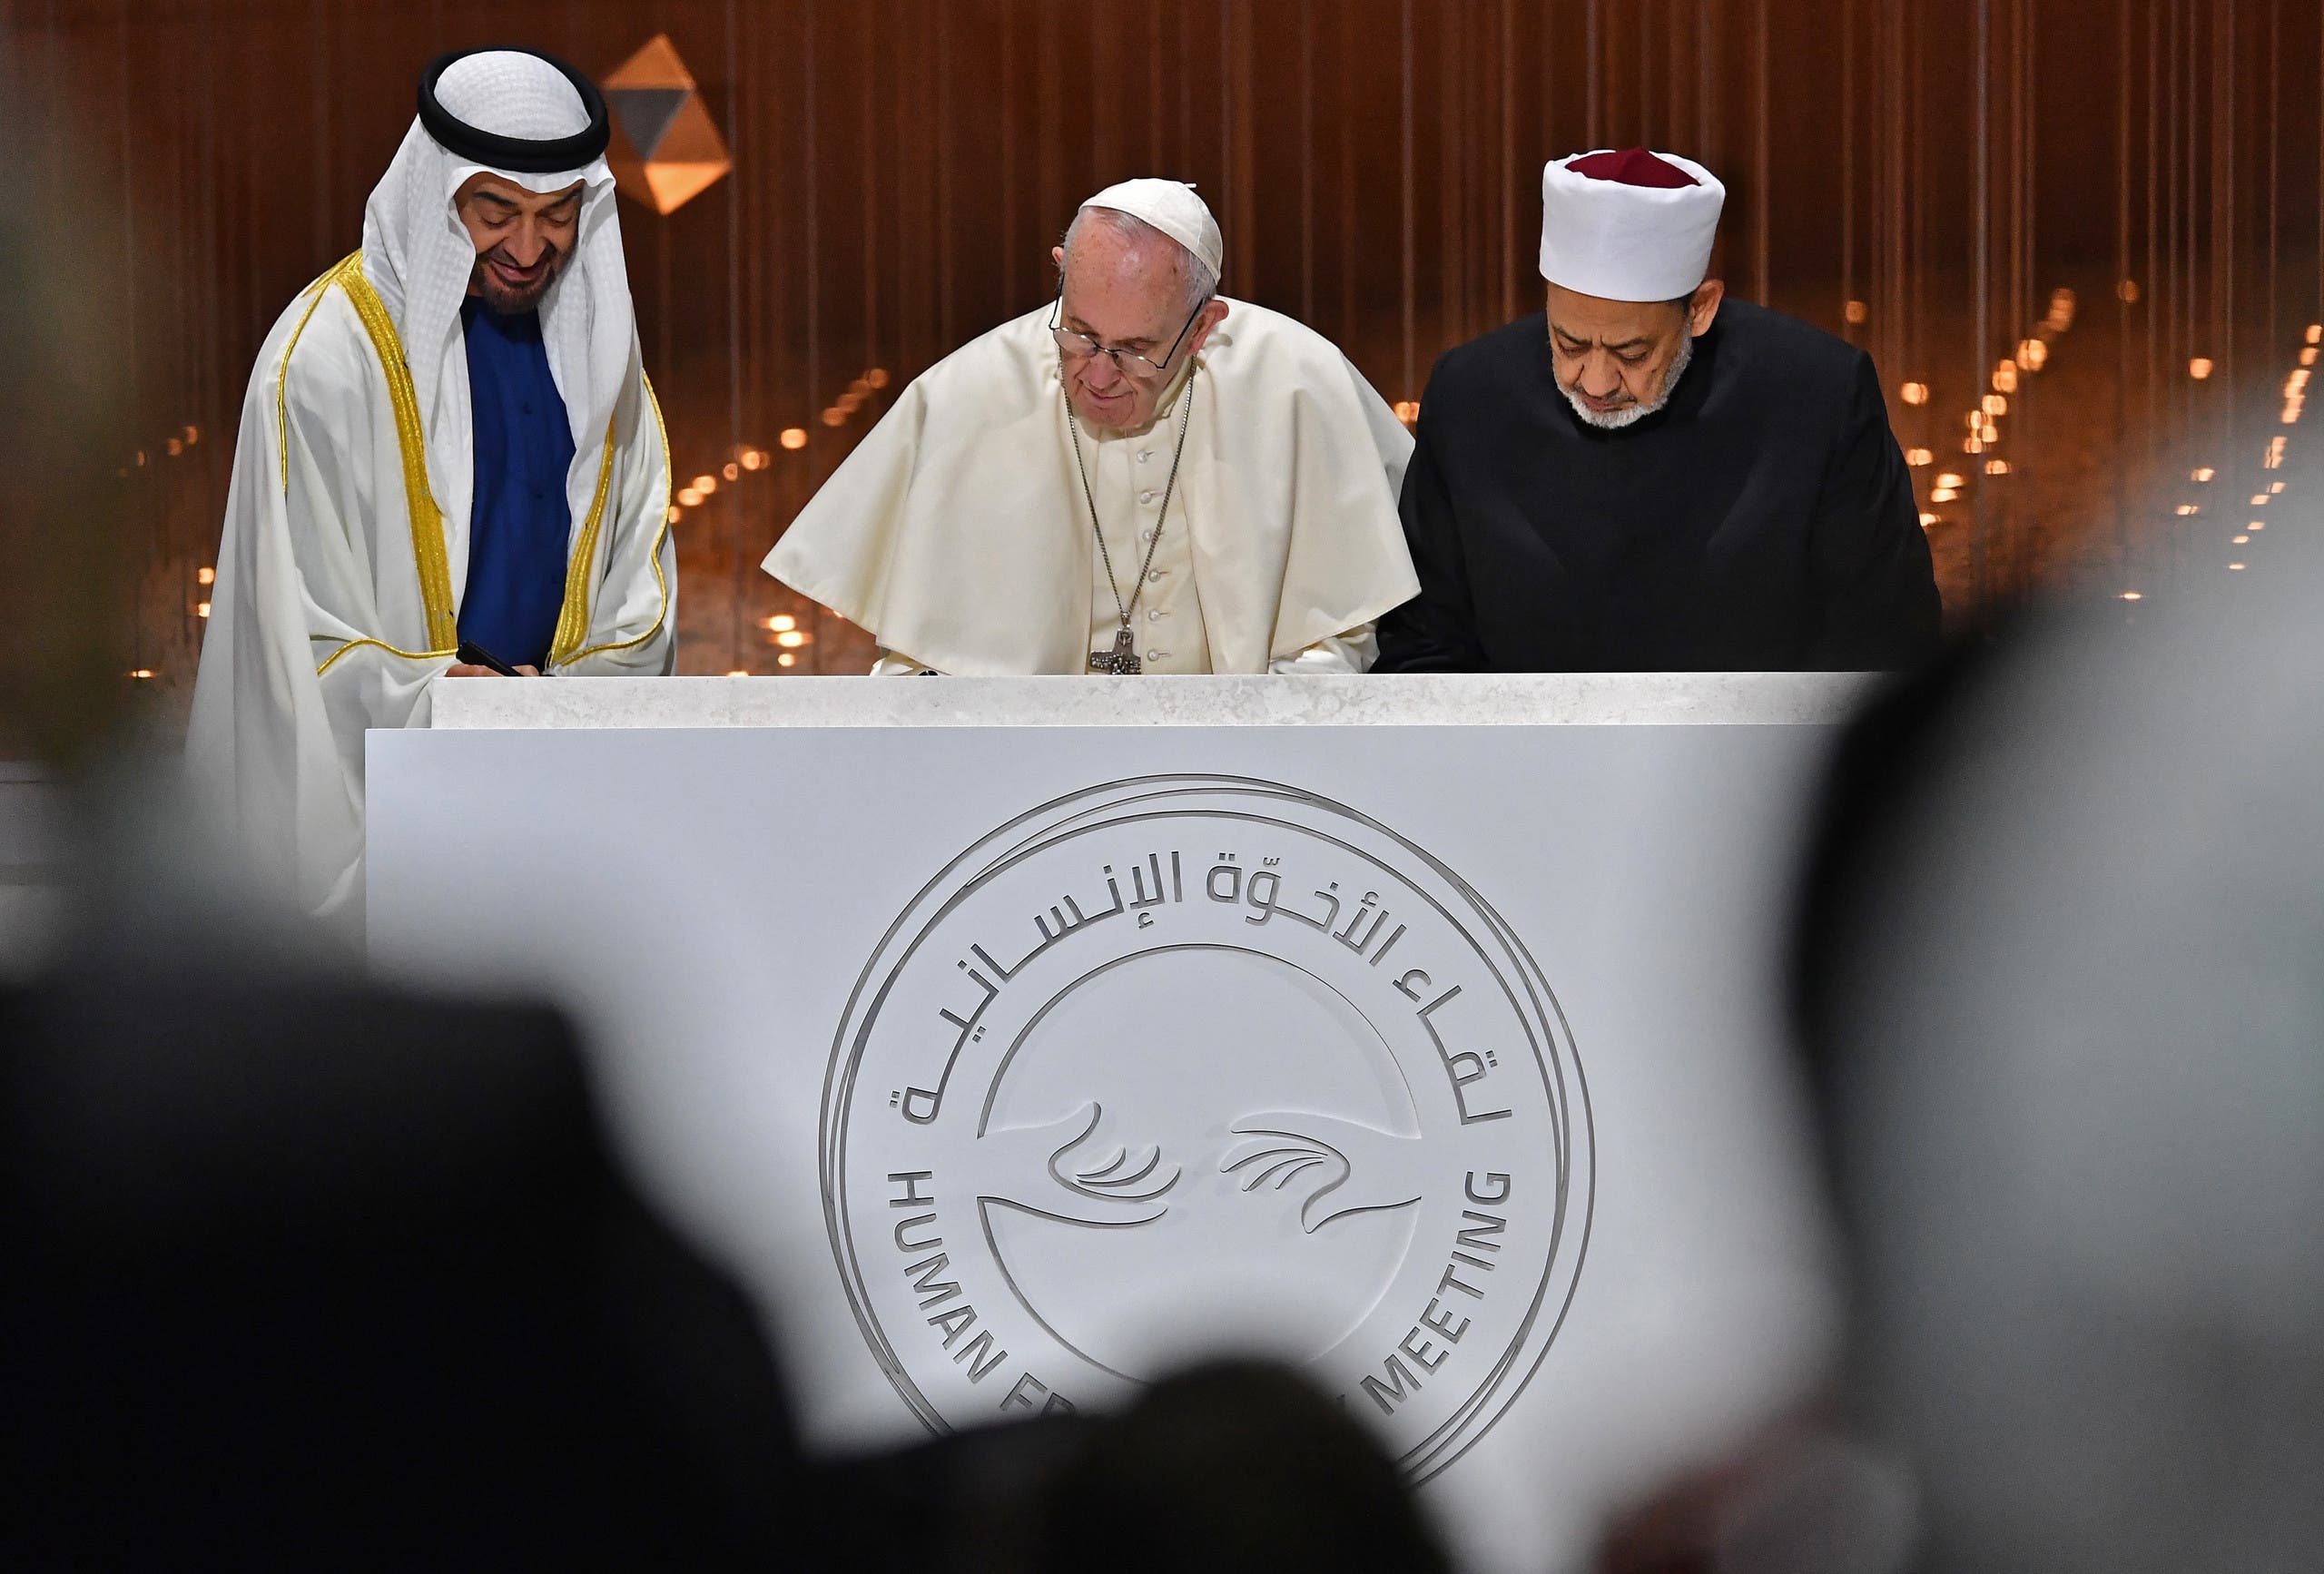 Abu Dhabi Crown Prince Sheikh Mohamed bin Zayed Al Nahyan and Pope Francis discuss brotherhood in confronting COVID-19